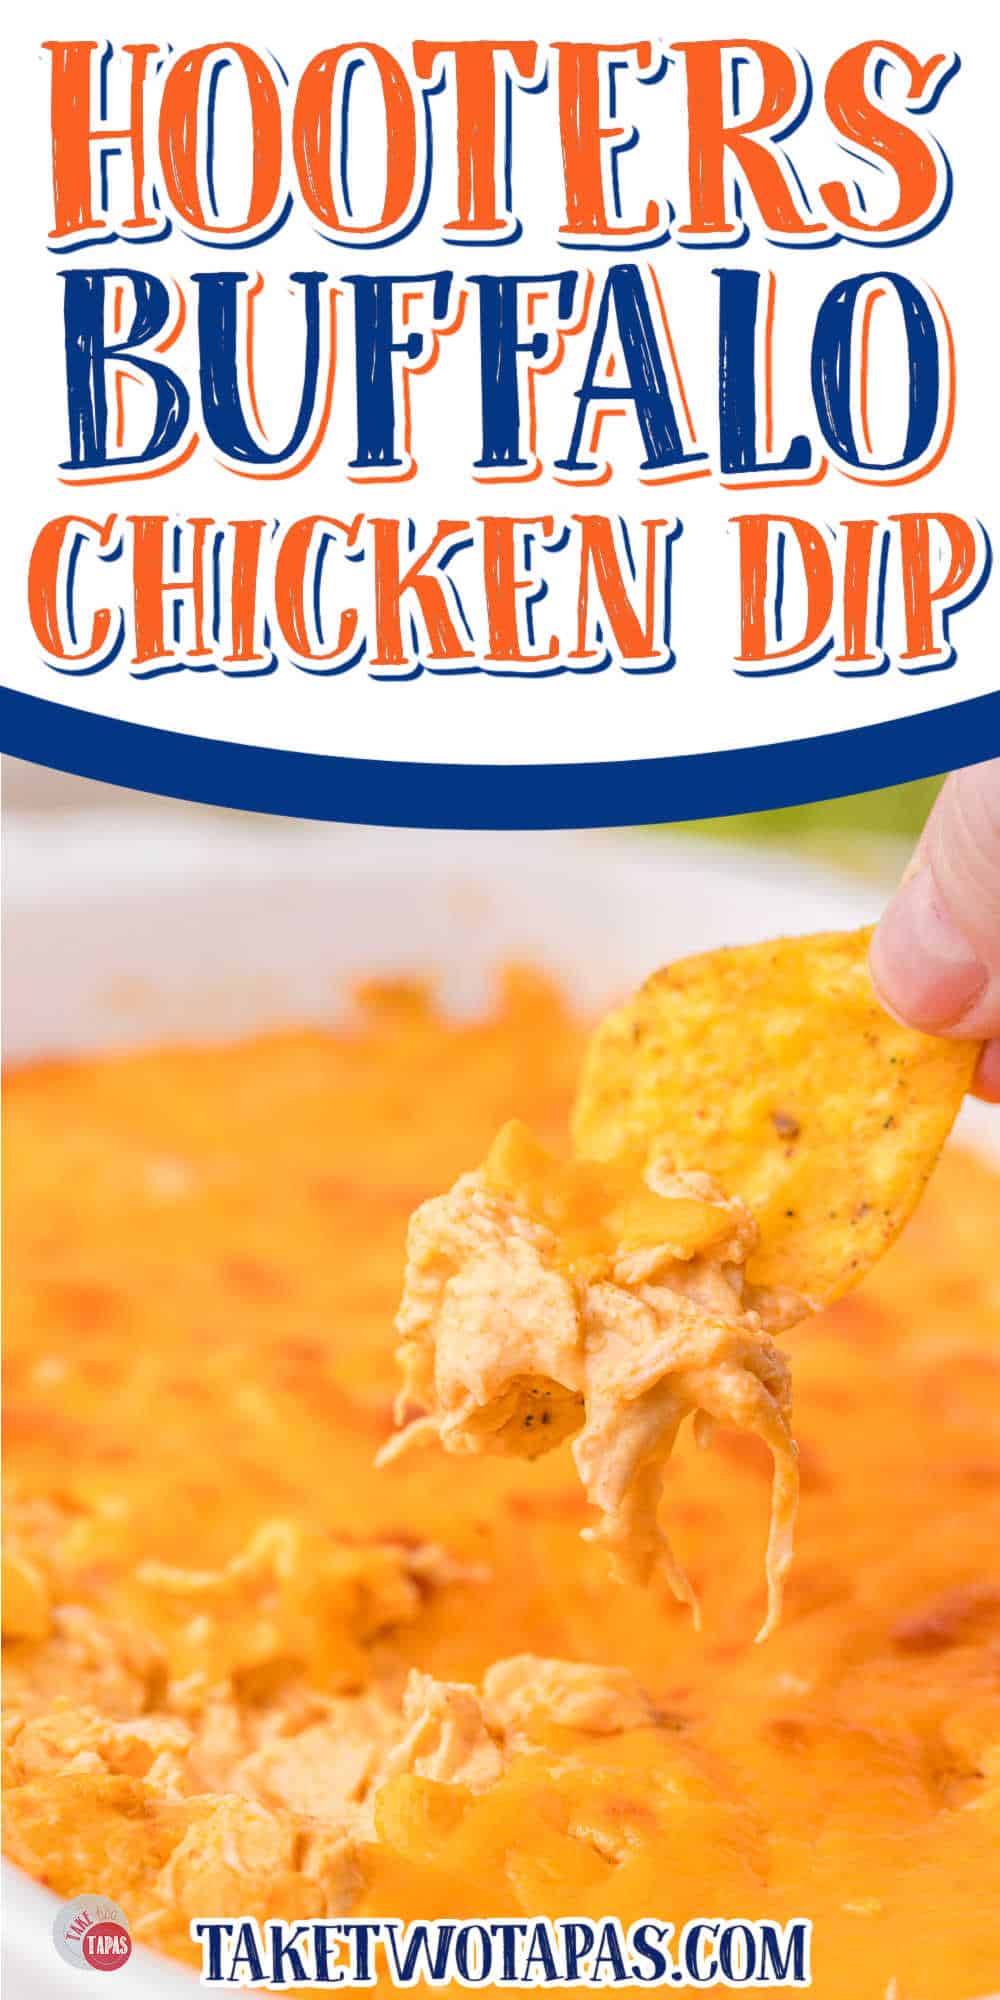 chip holding din in a hand with banner and text "Hooters Buffalo Chicken Dip"